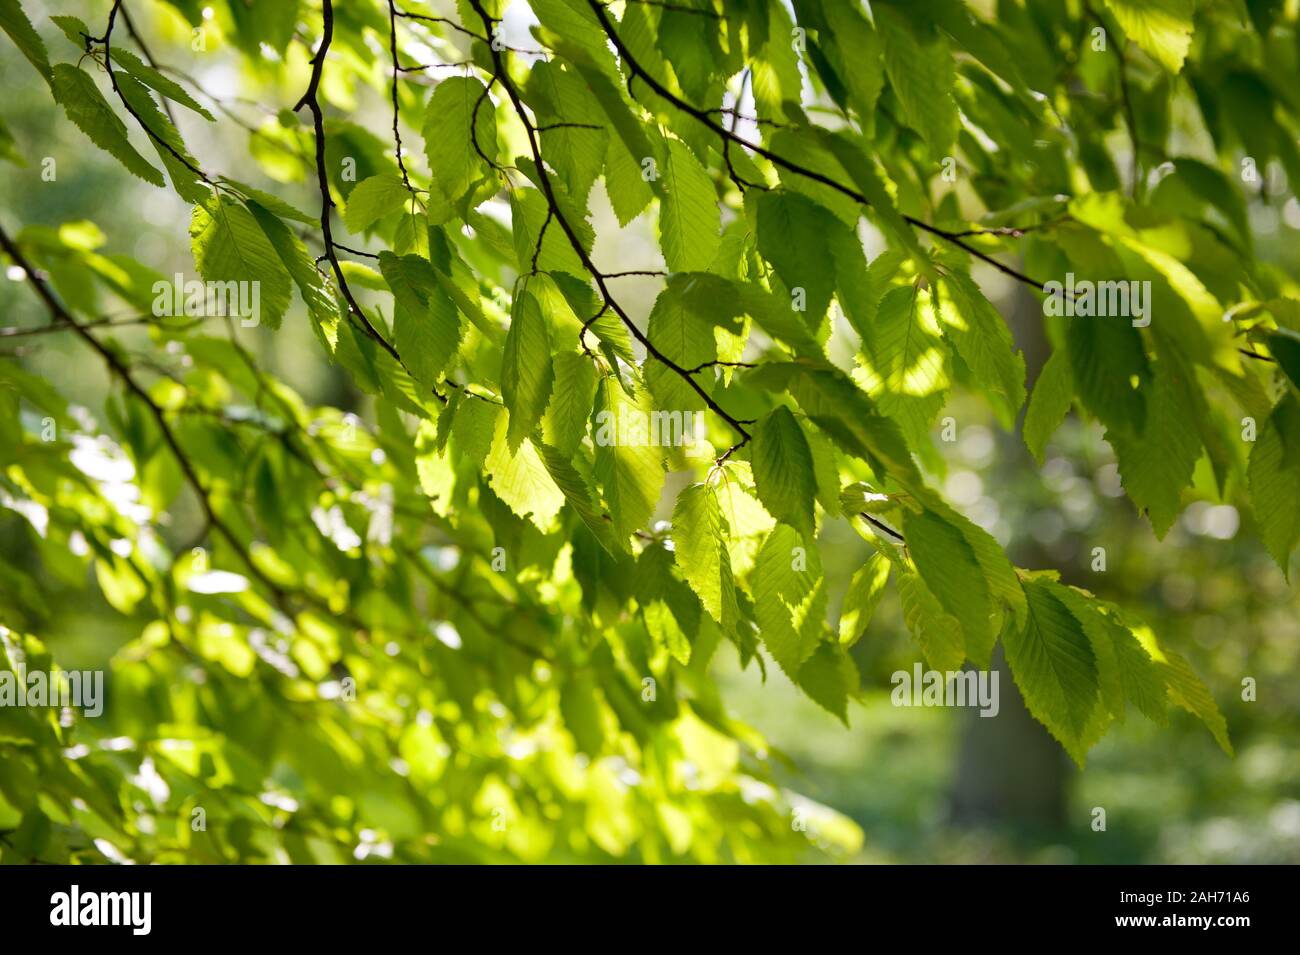 Elm young fragile foliage closeup, fresh green Ulmus leaves on twigs in sunlight, deciduous tree detail, nature and greenery in springtime, sunny day. Stock Photo